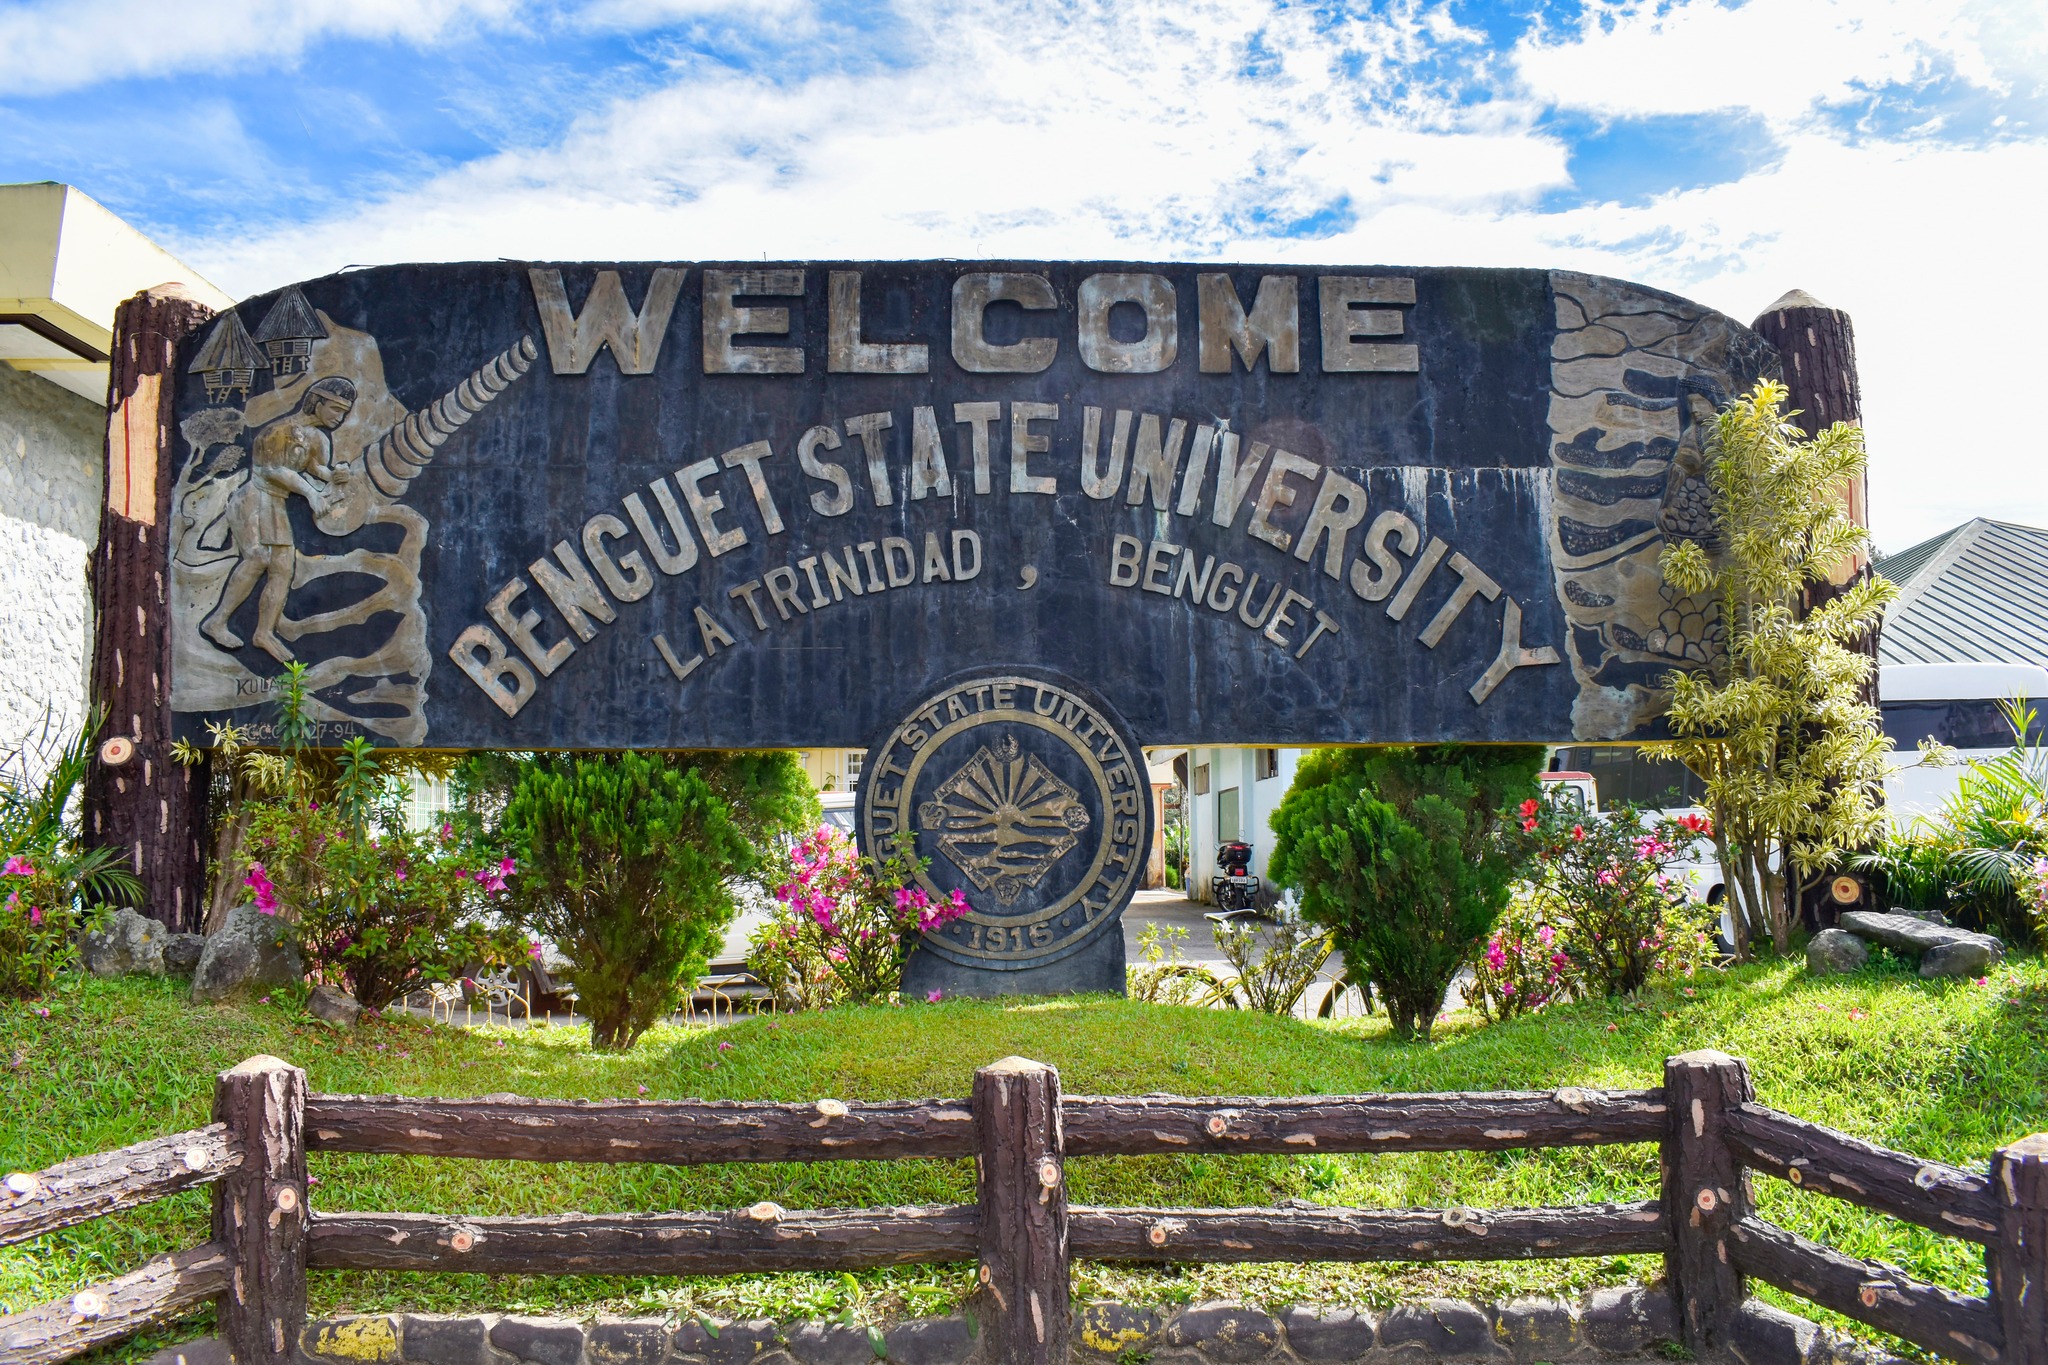 Benguet State University in the Cordilleras has now become a college of medicine!